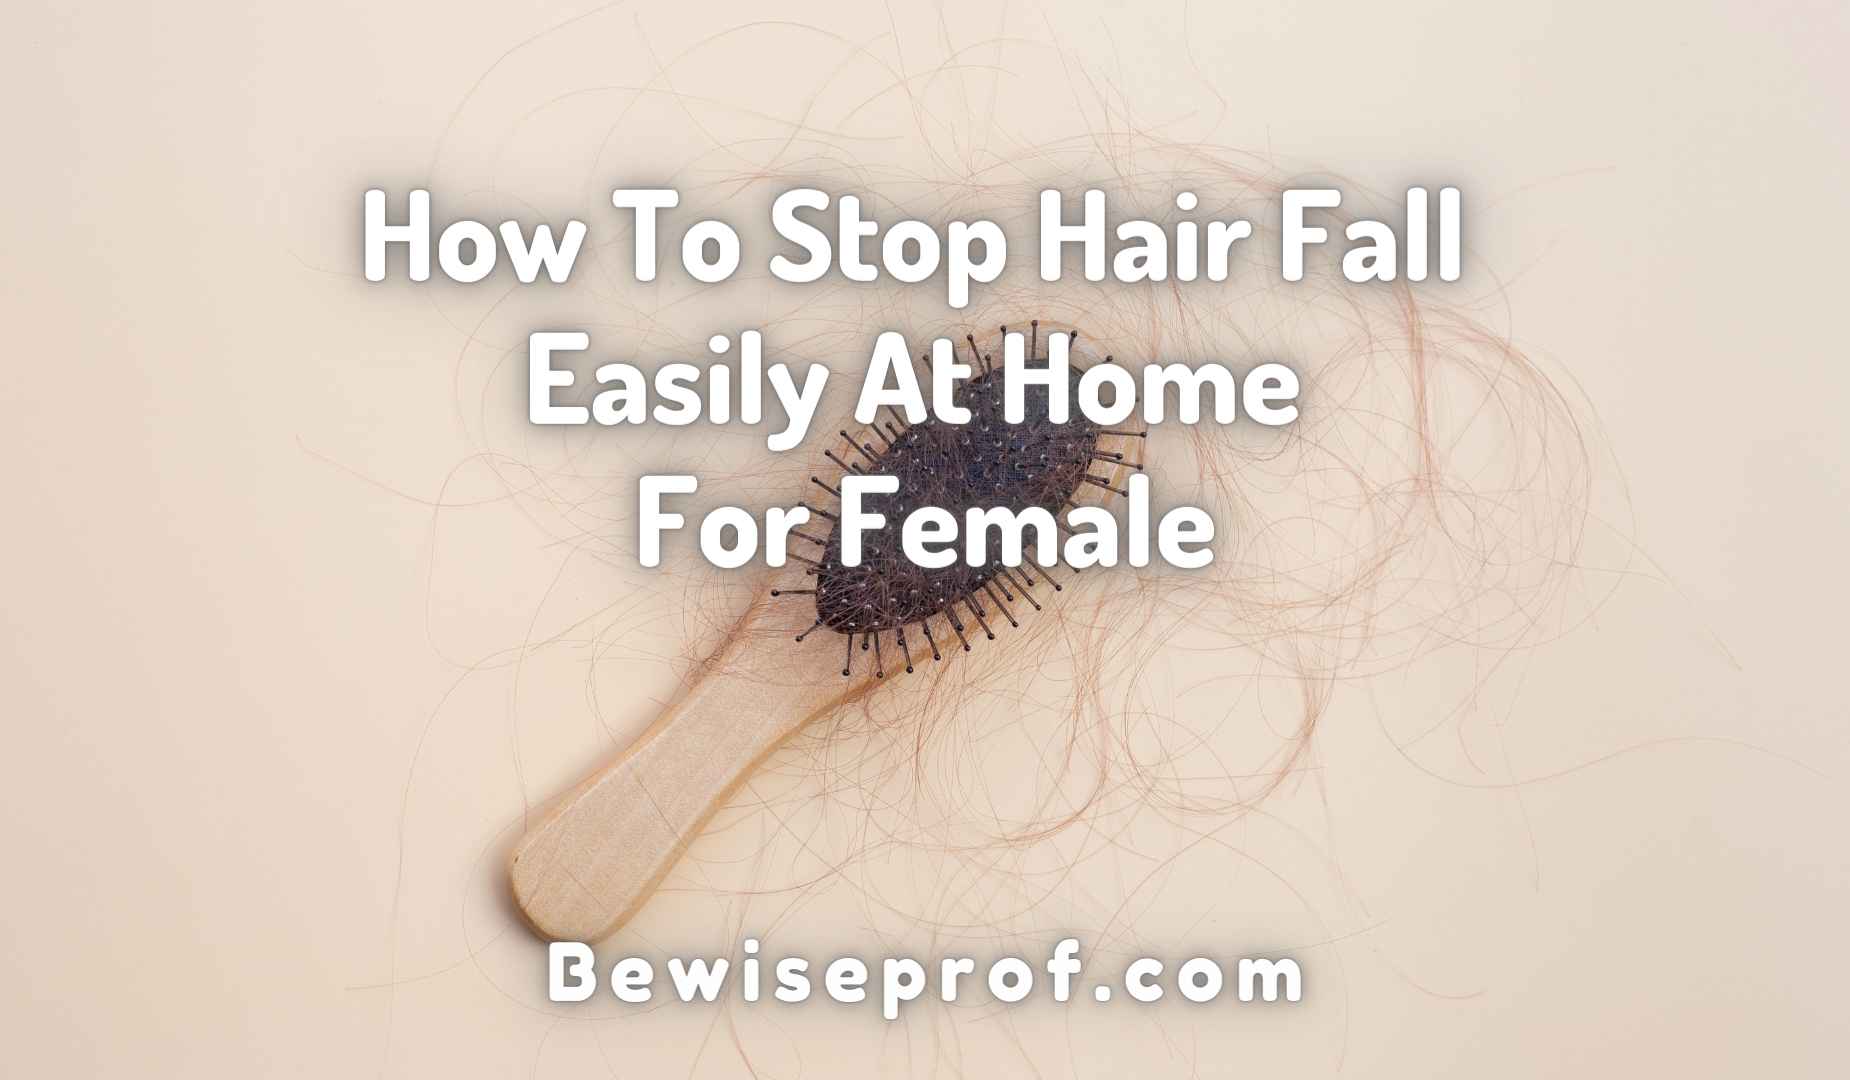 How To Stop Hair Fall Easily At Home For Female